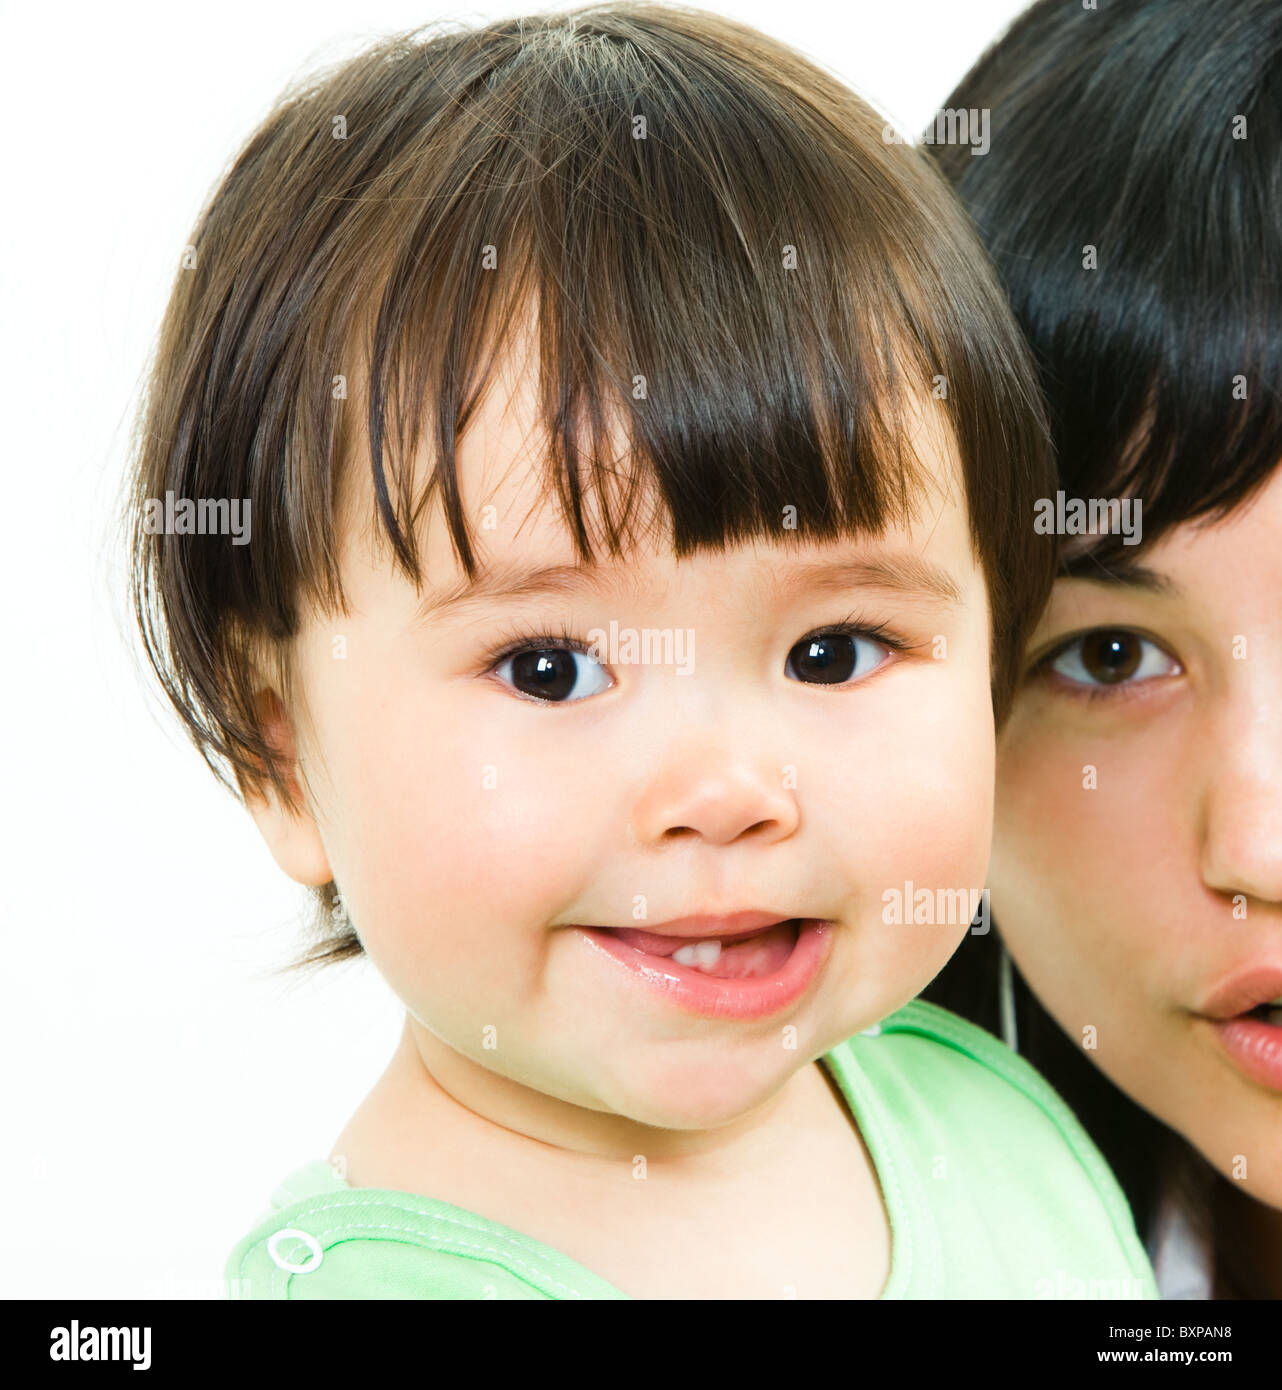 Close-up of small girl’s face looking at camera with her mother on the background Stock Photo